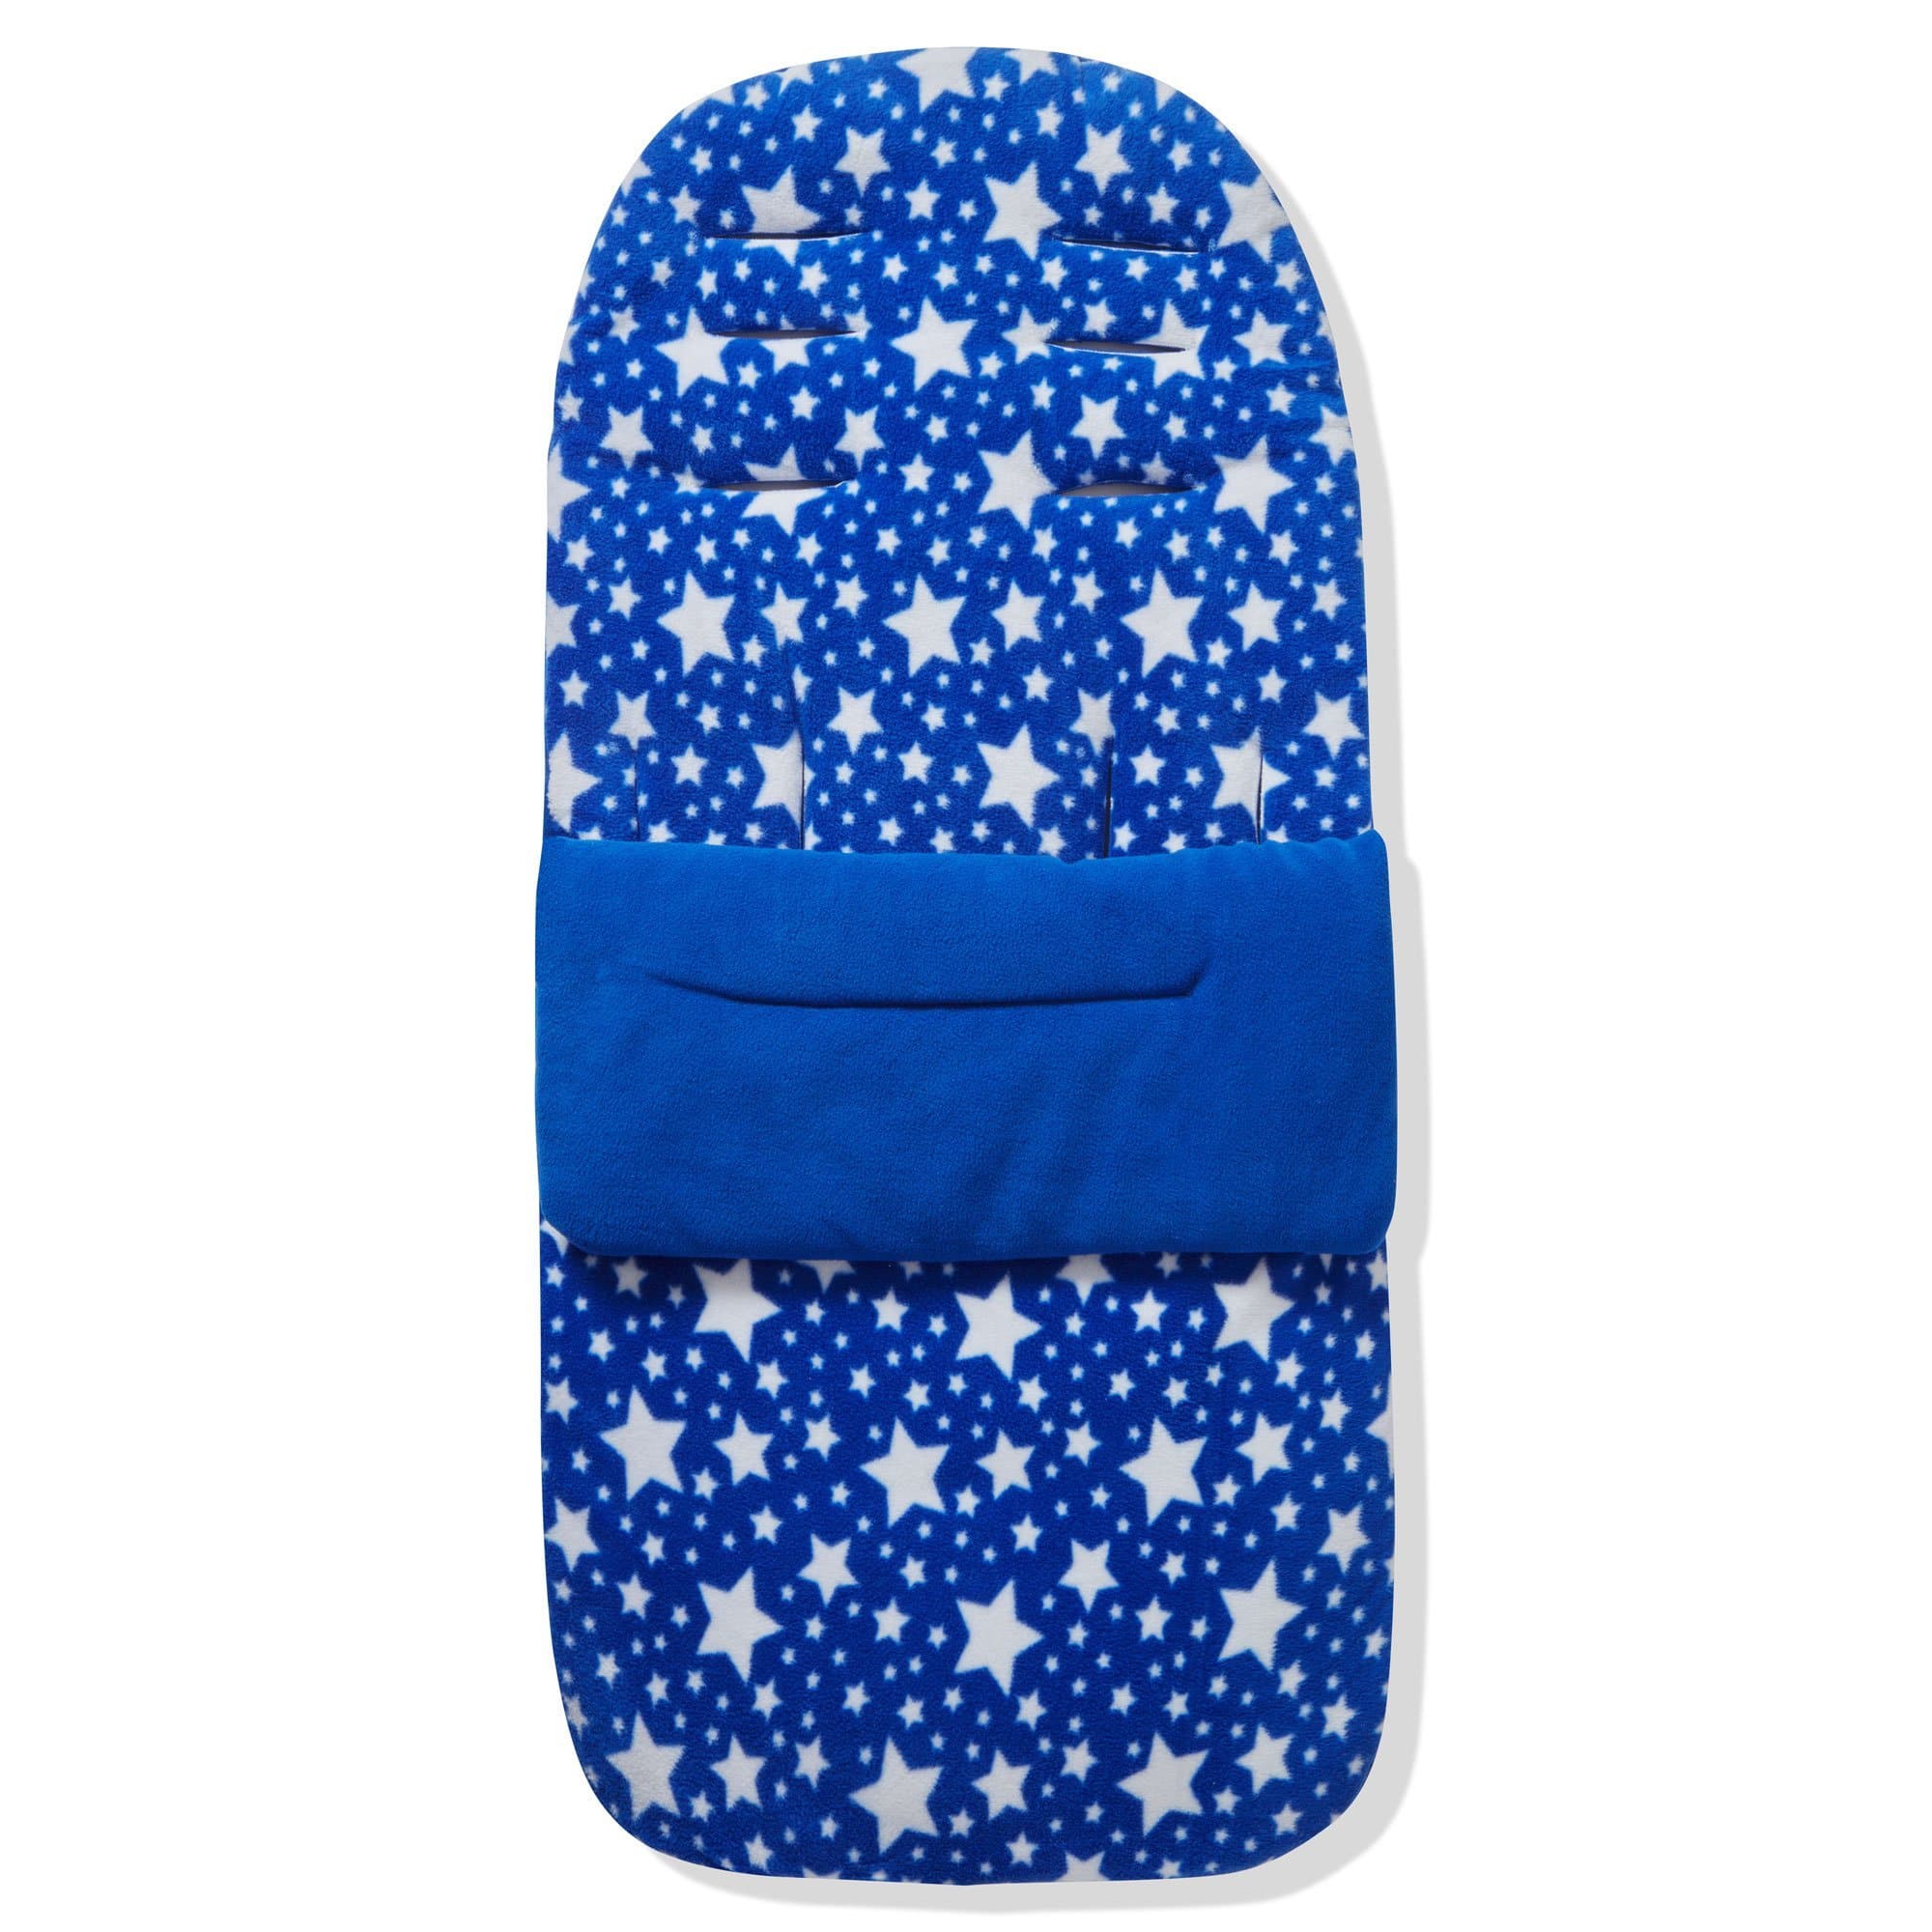 Fleece Footmuff / Cosy Toes Compatible with Hartan - For Your Little One